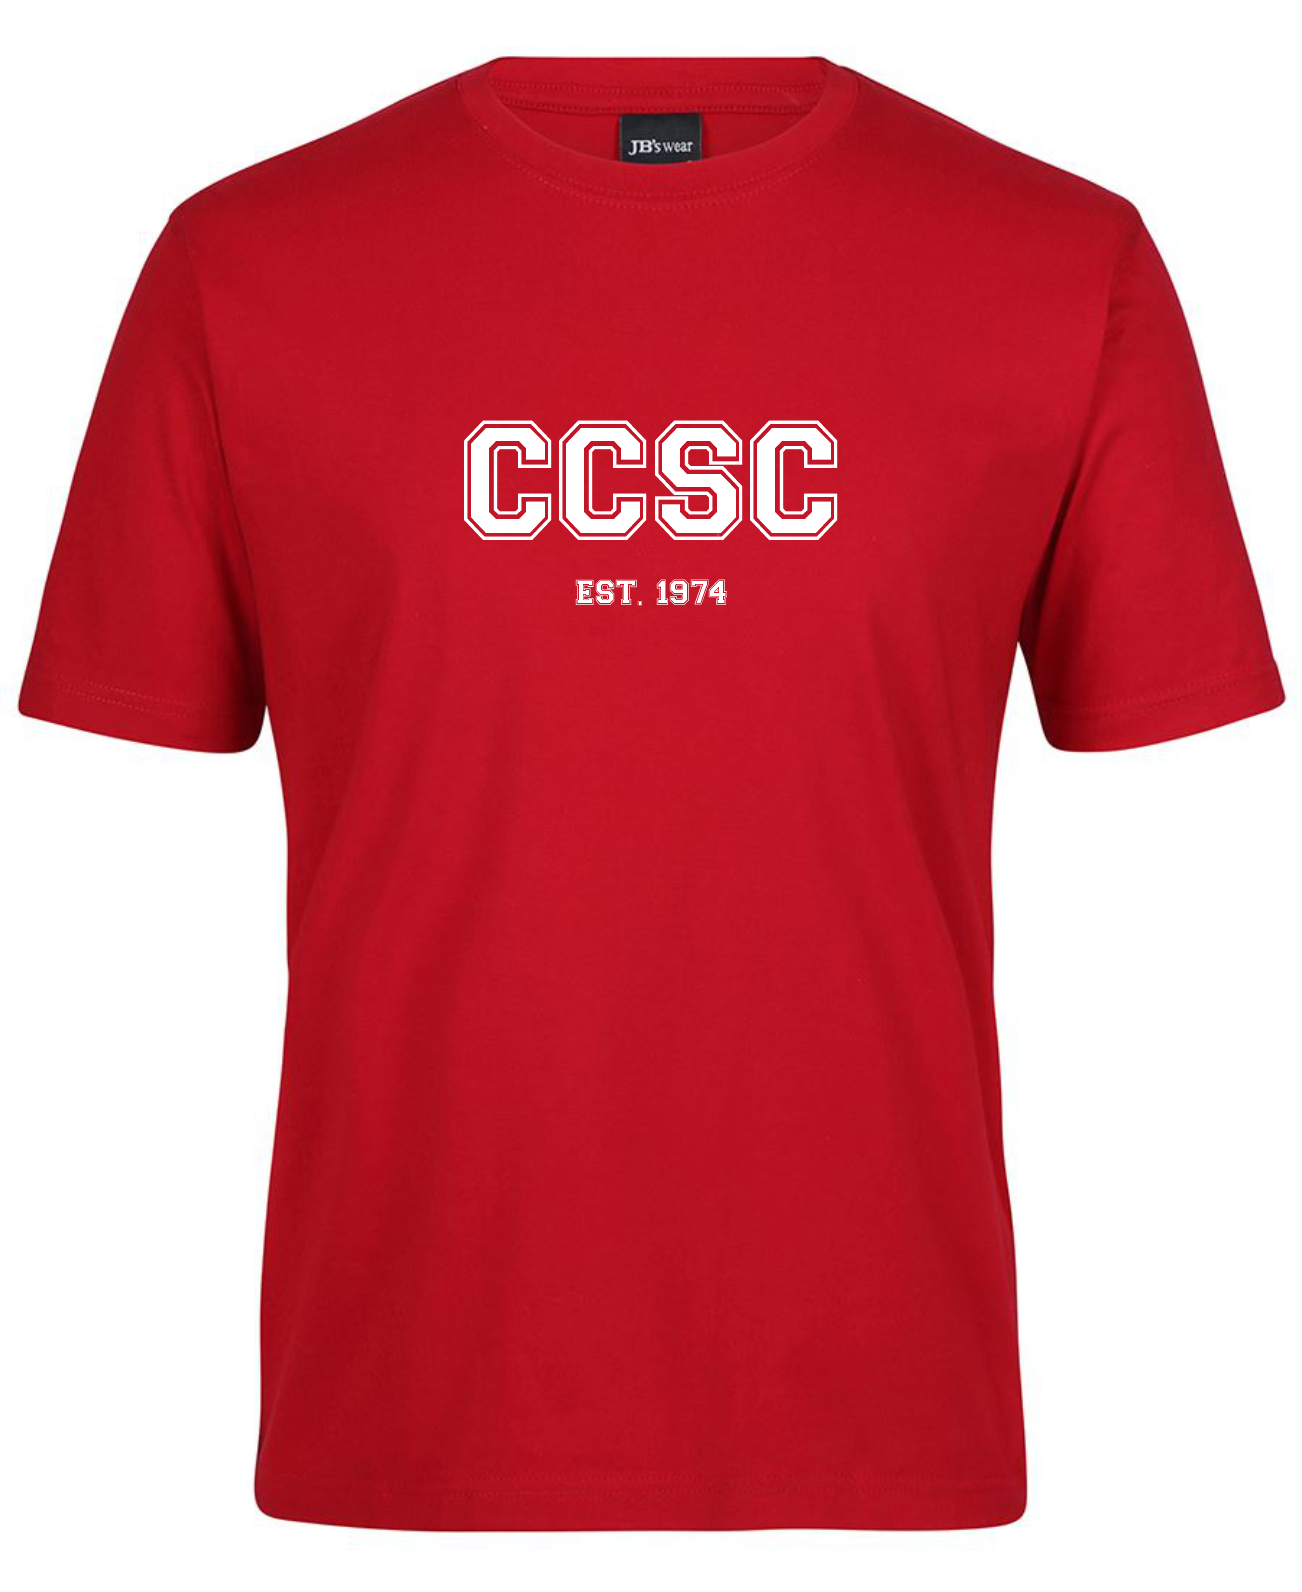 Kids Club Tee with CCSC Logo